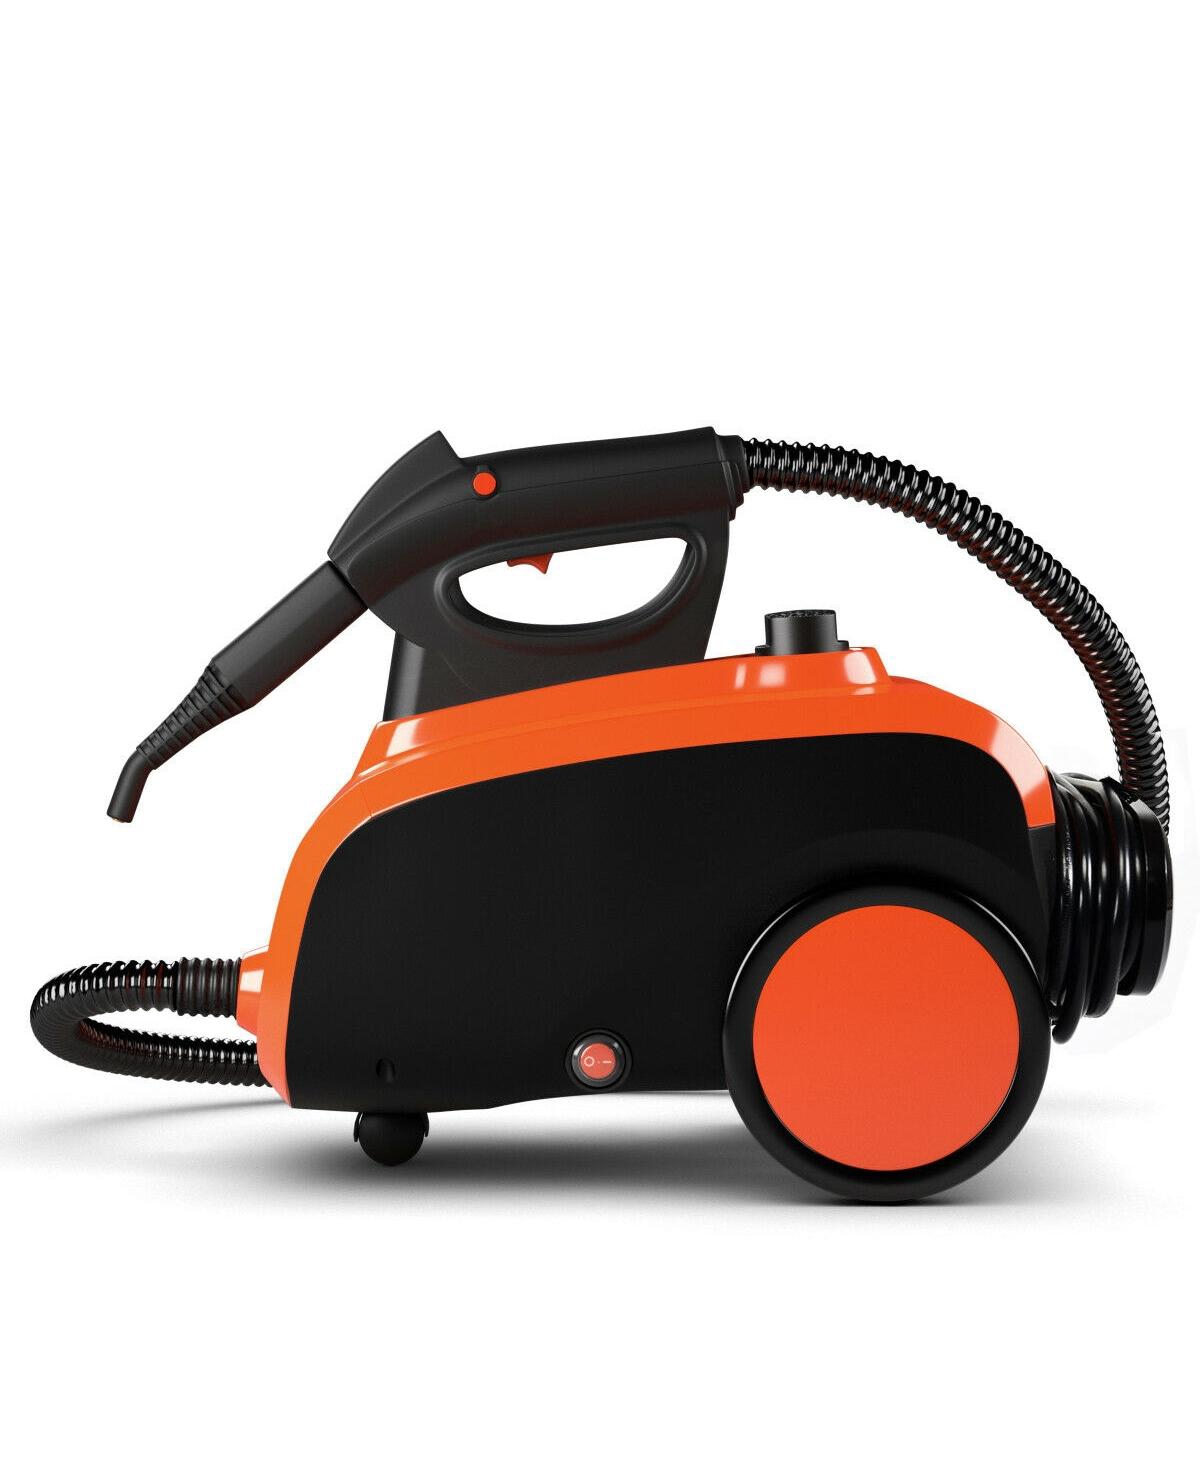 Heavy Duty Household Multipurpose Steam Cleaner with 18 Accessories - Orange / Black